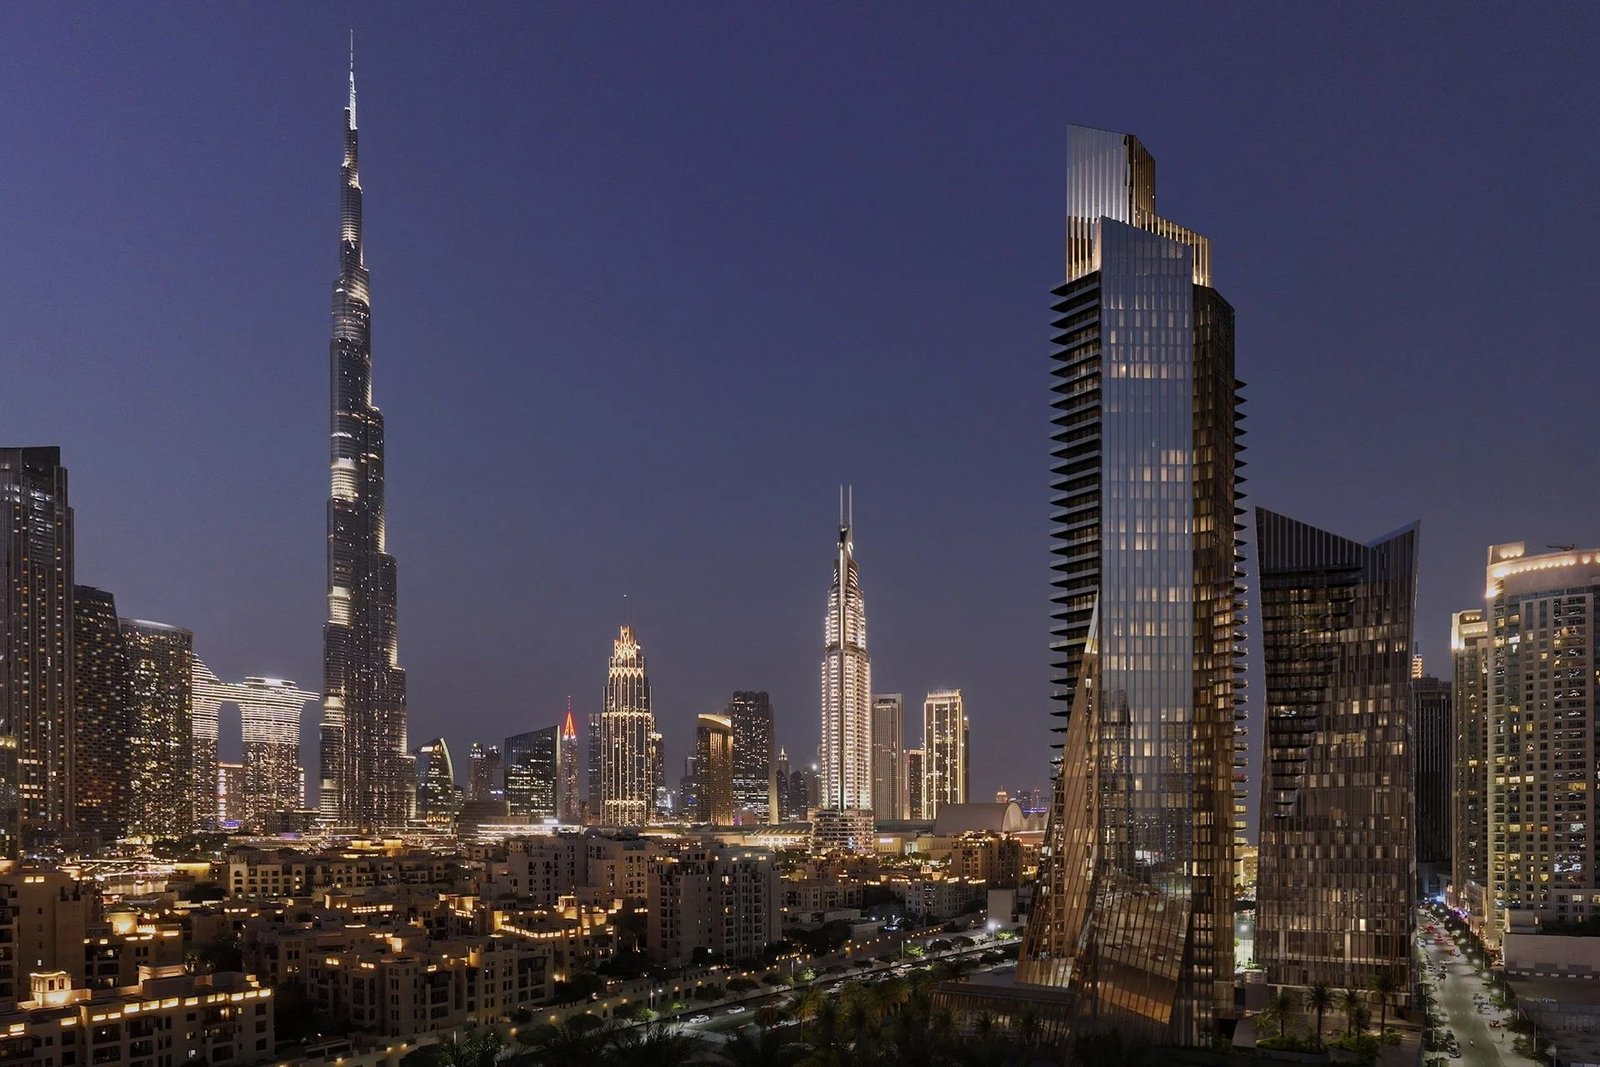 Baccarat Residences at Downtown Dubai by Shamal Holding